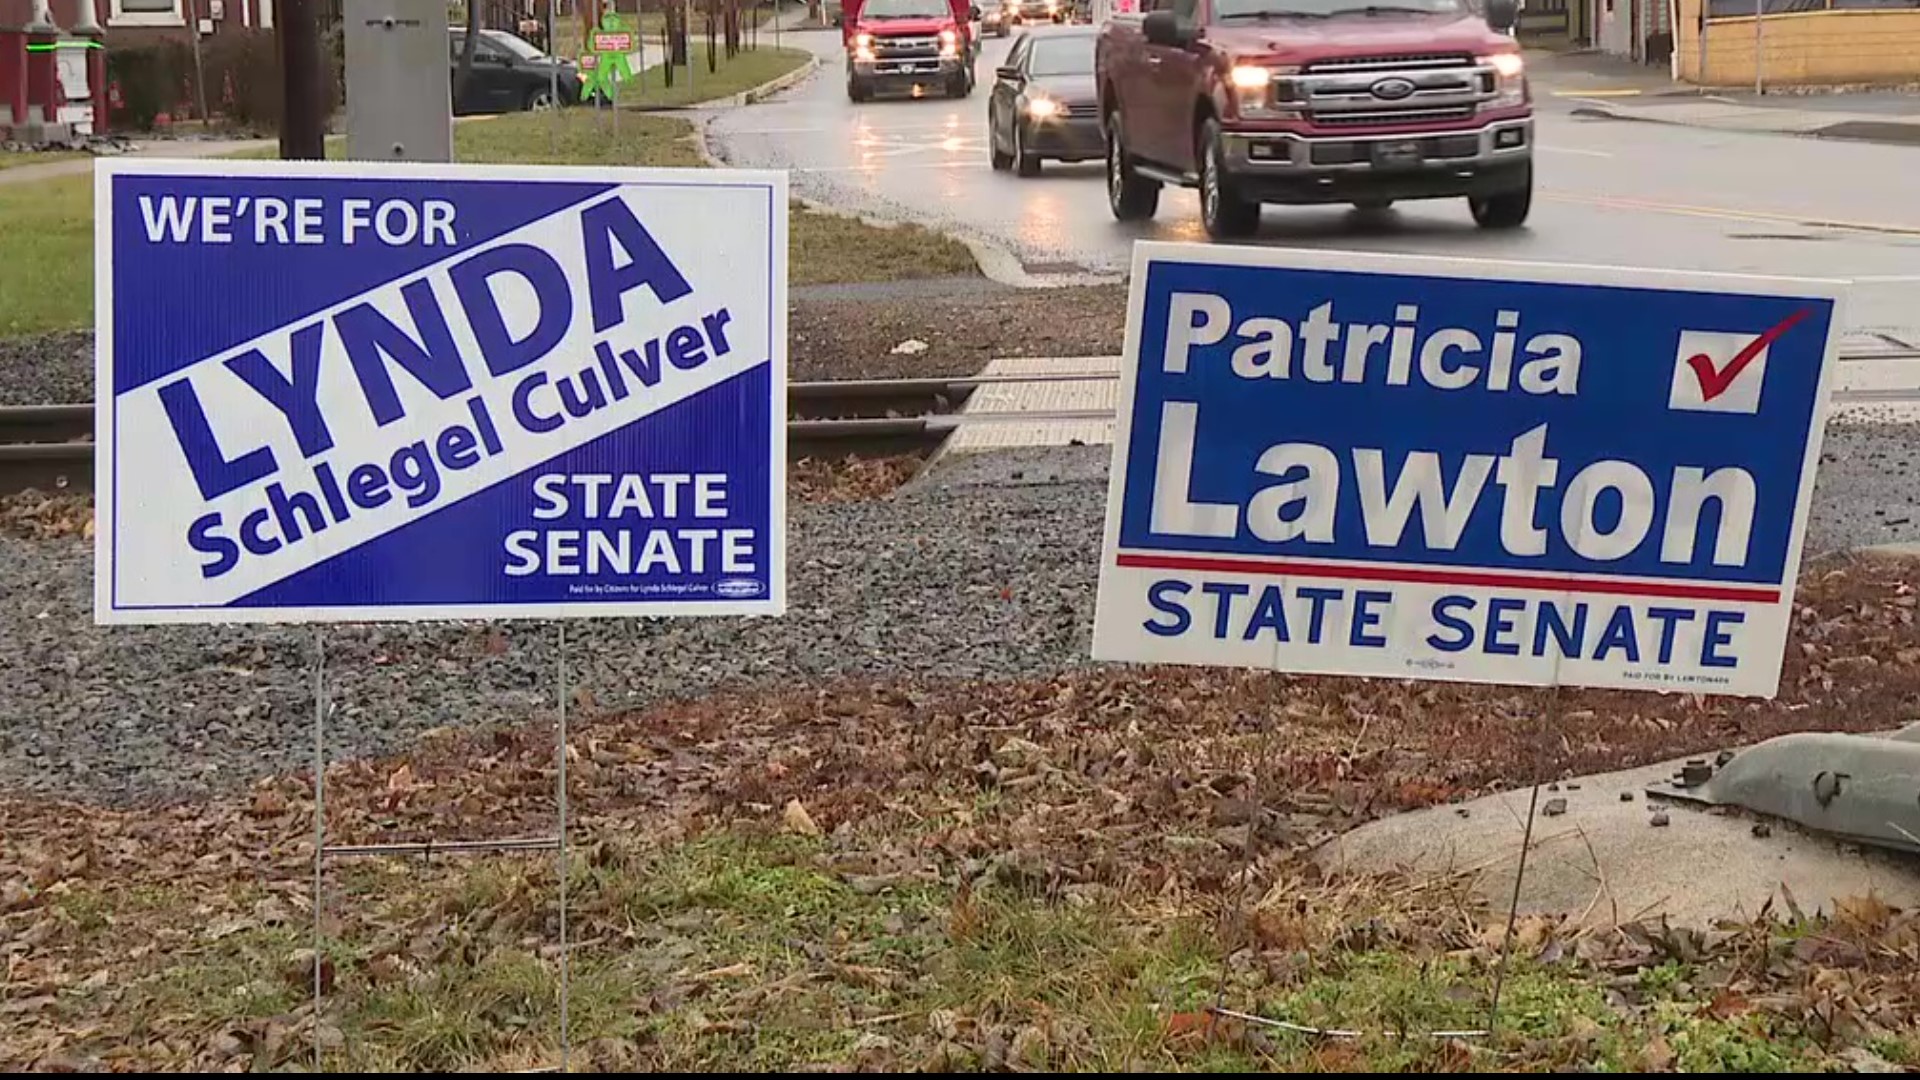 An upcoming special election is set in five counties to replace a retiring state senator.